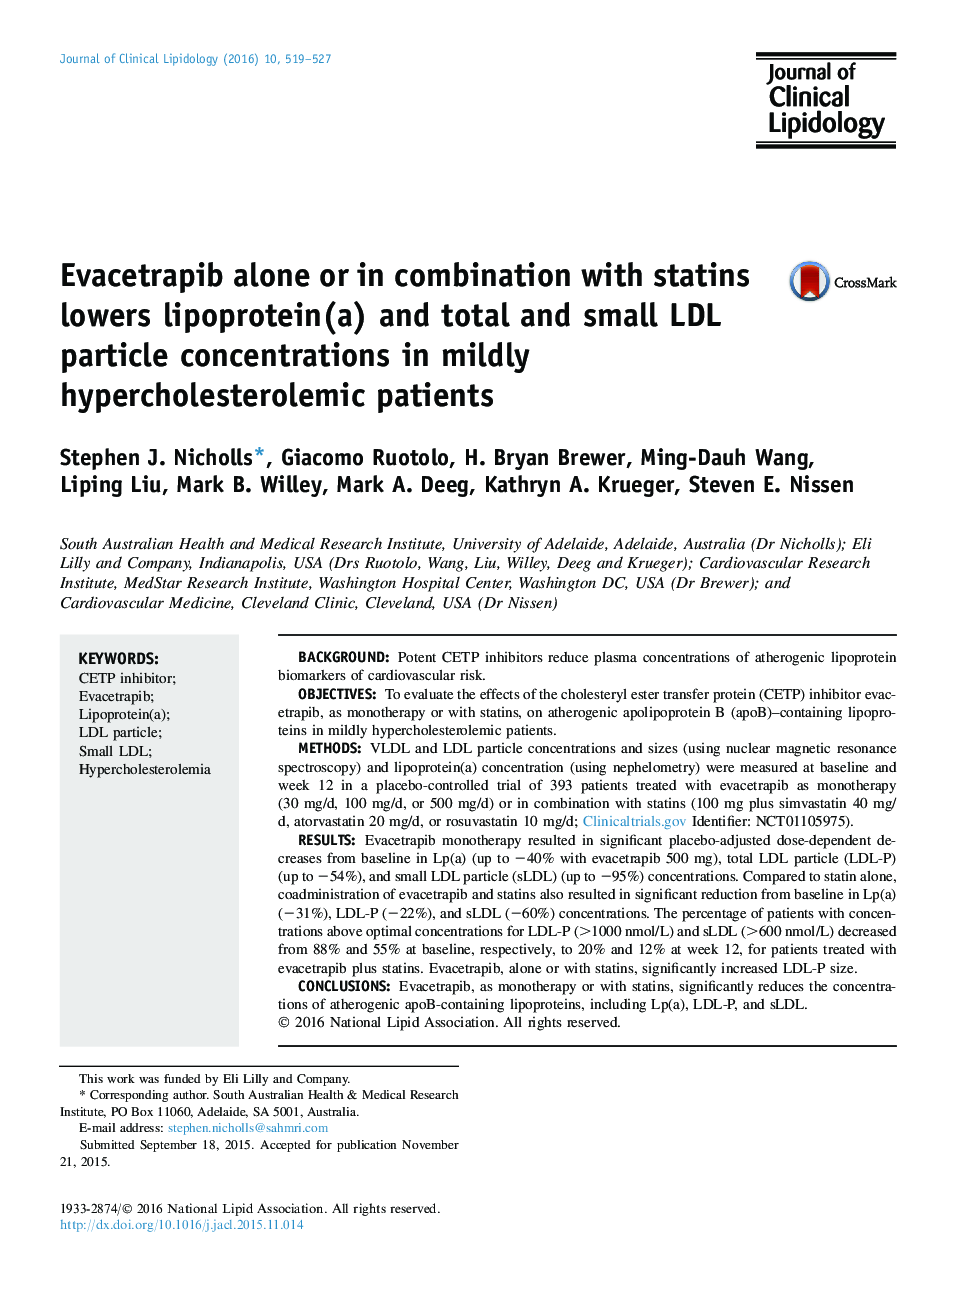 Evacetrapib alone or in combination with statins lowers lipoprotein(a) and total and small LDL particle concentrations in mildly hypercholesterolemic patients